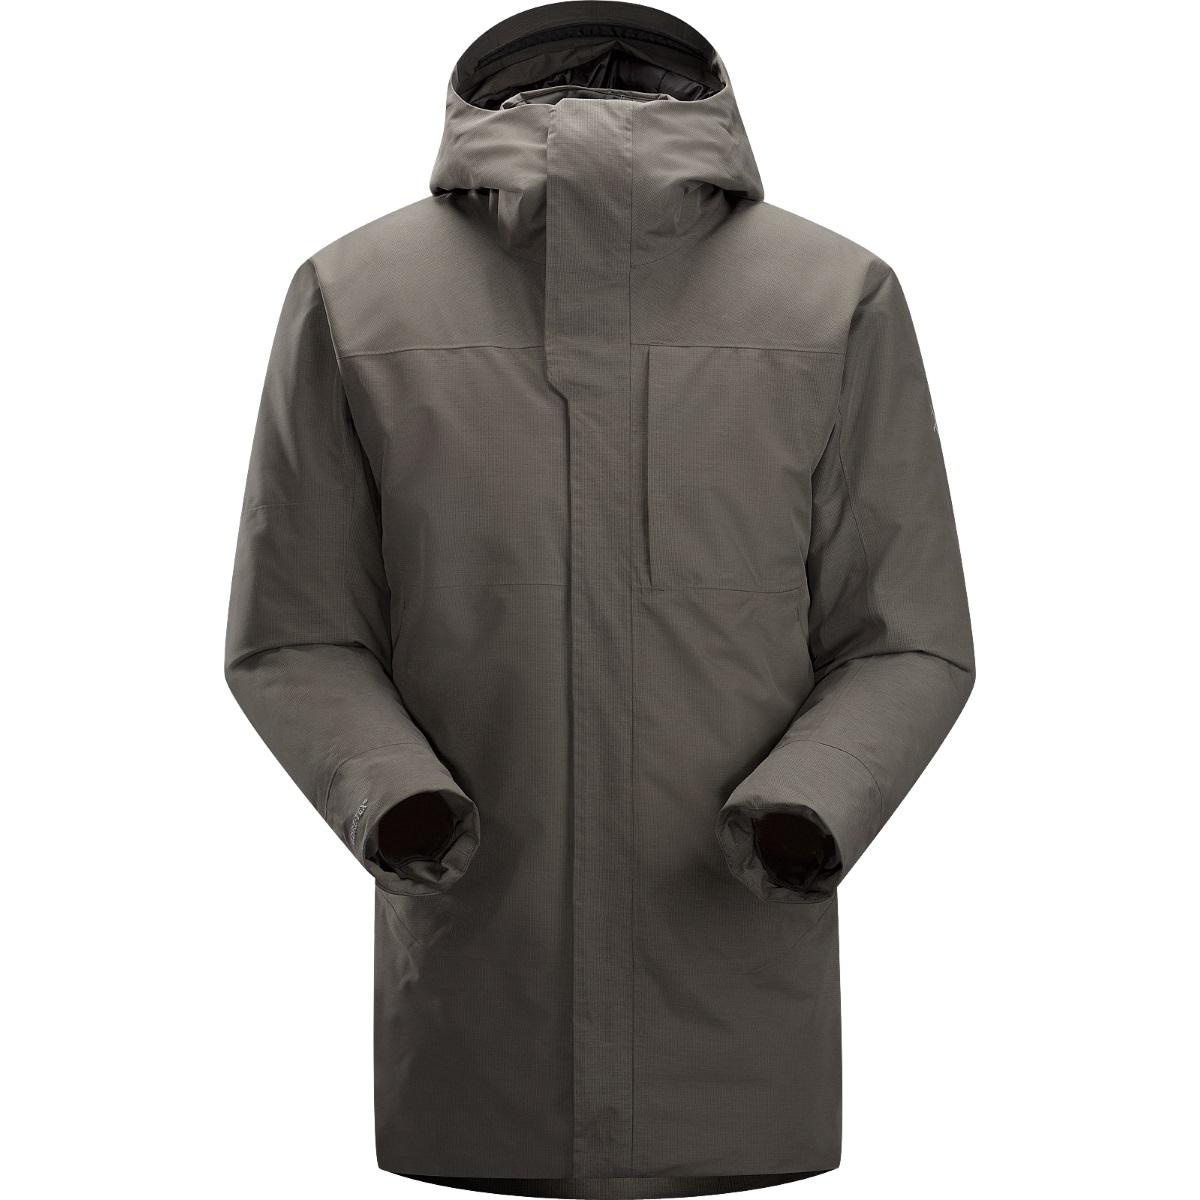 Arc'teryx Therme Parka, men's, discontinued colors (free ground ...